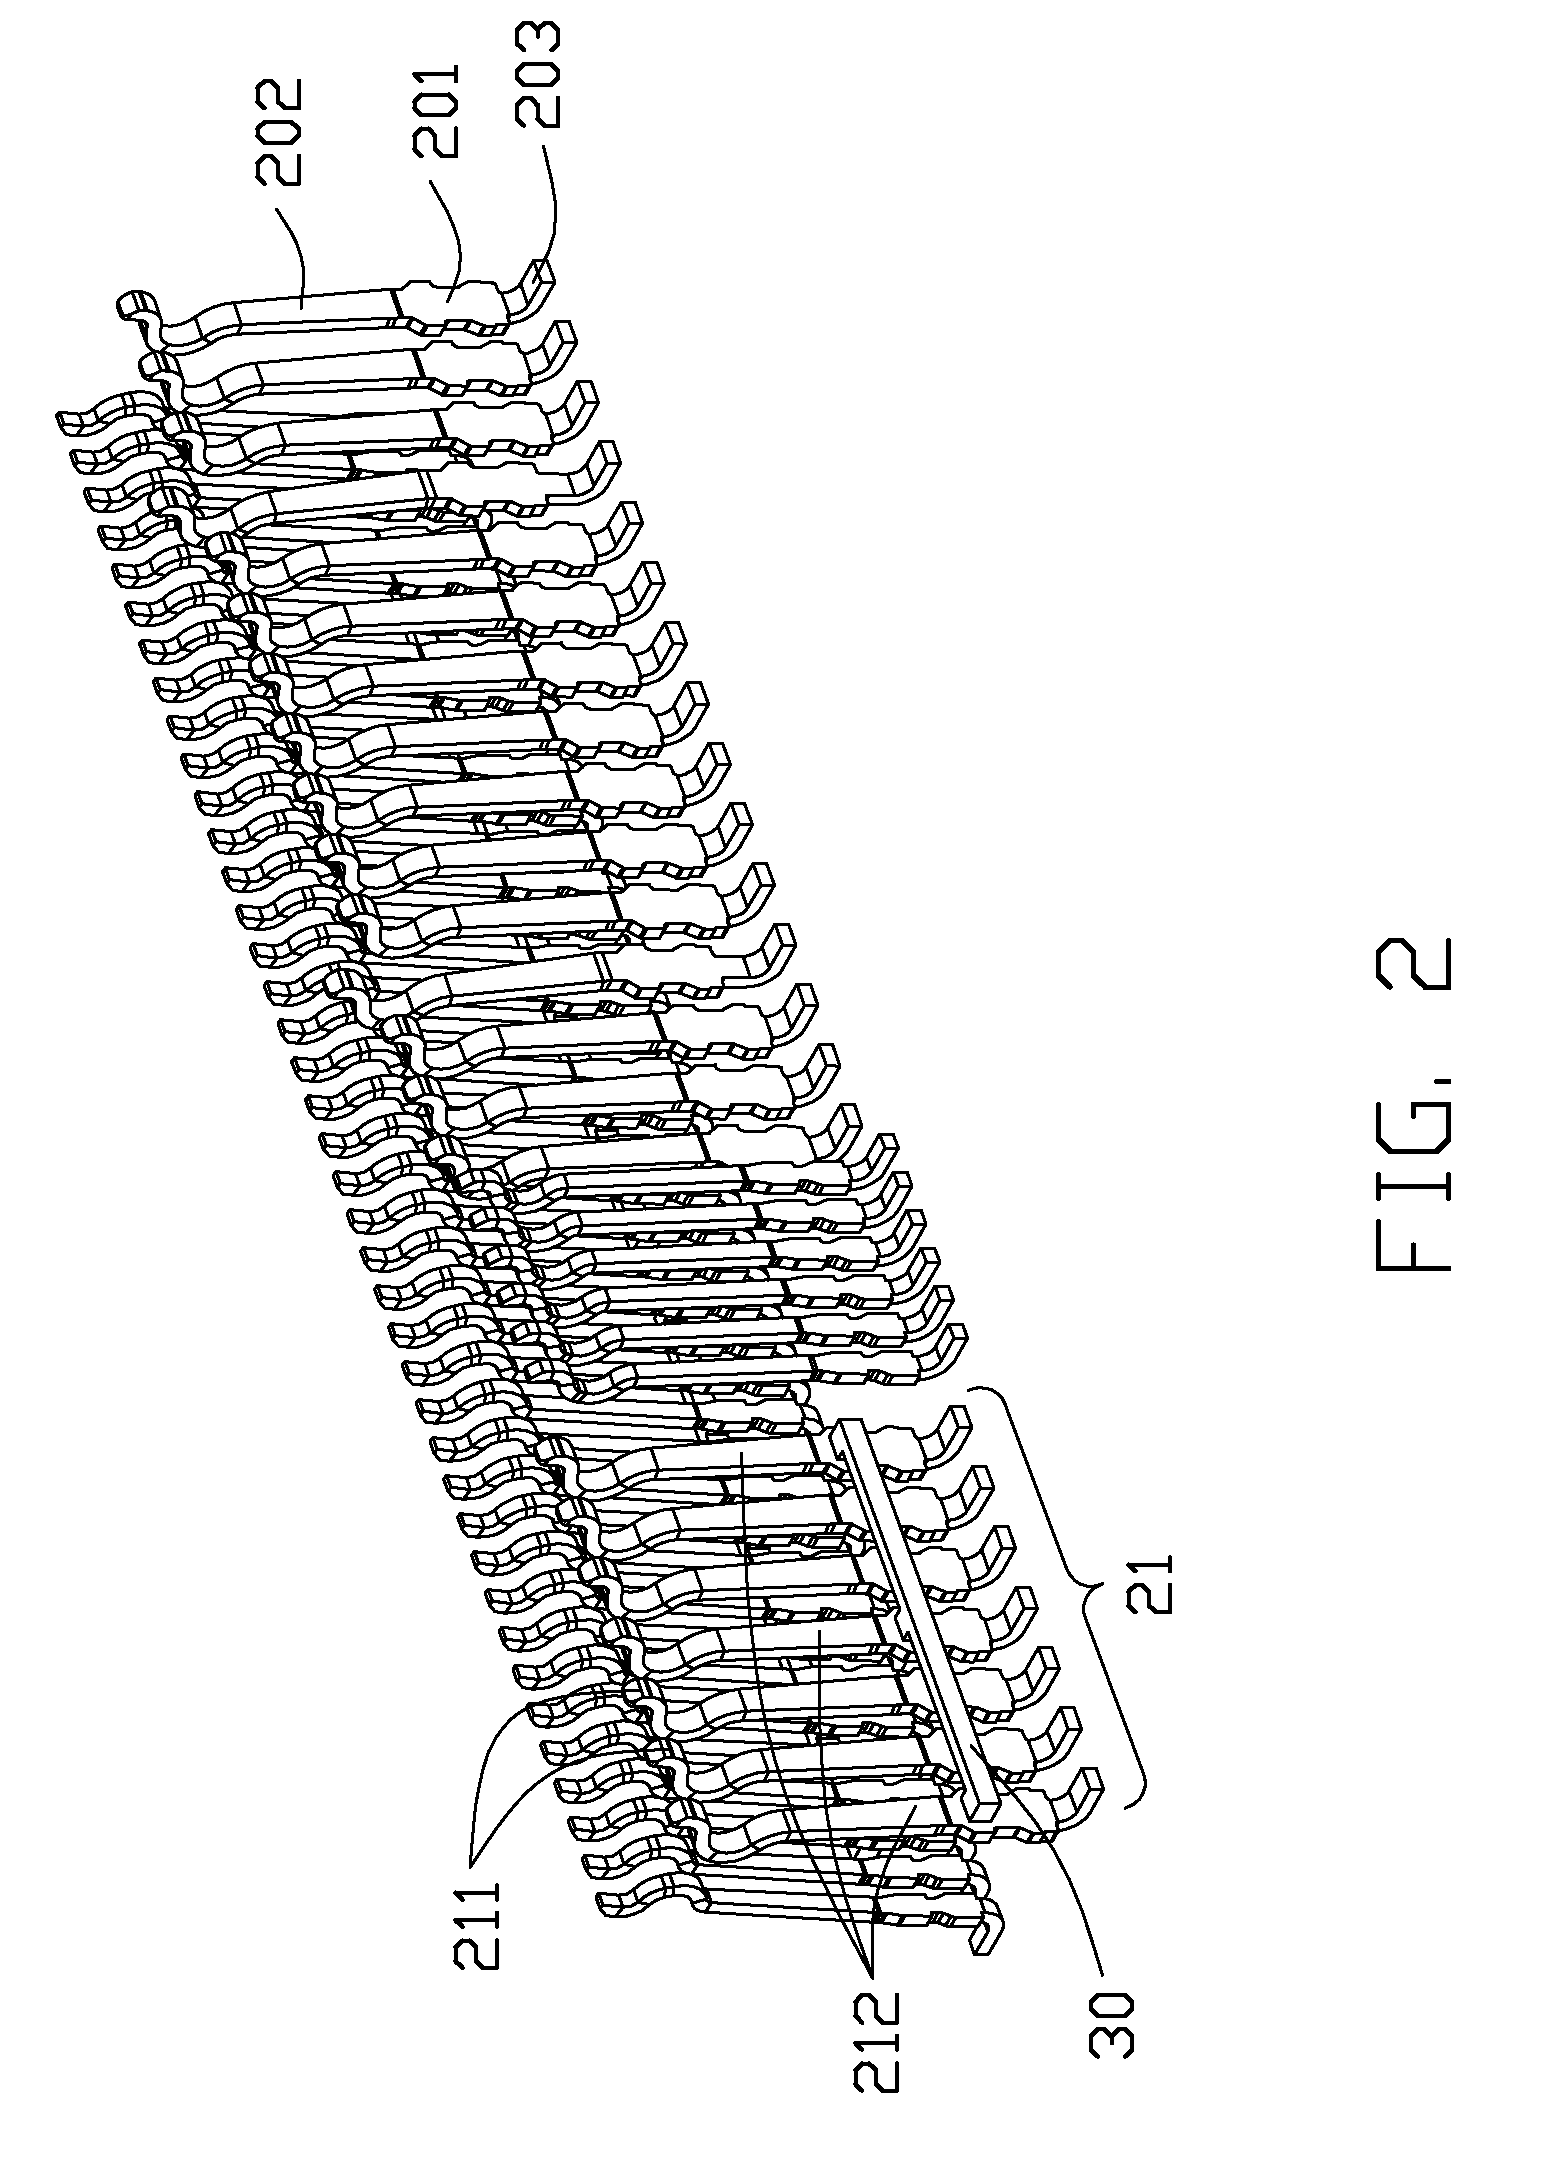 Electrical connector having better high-frequency performance